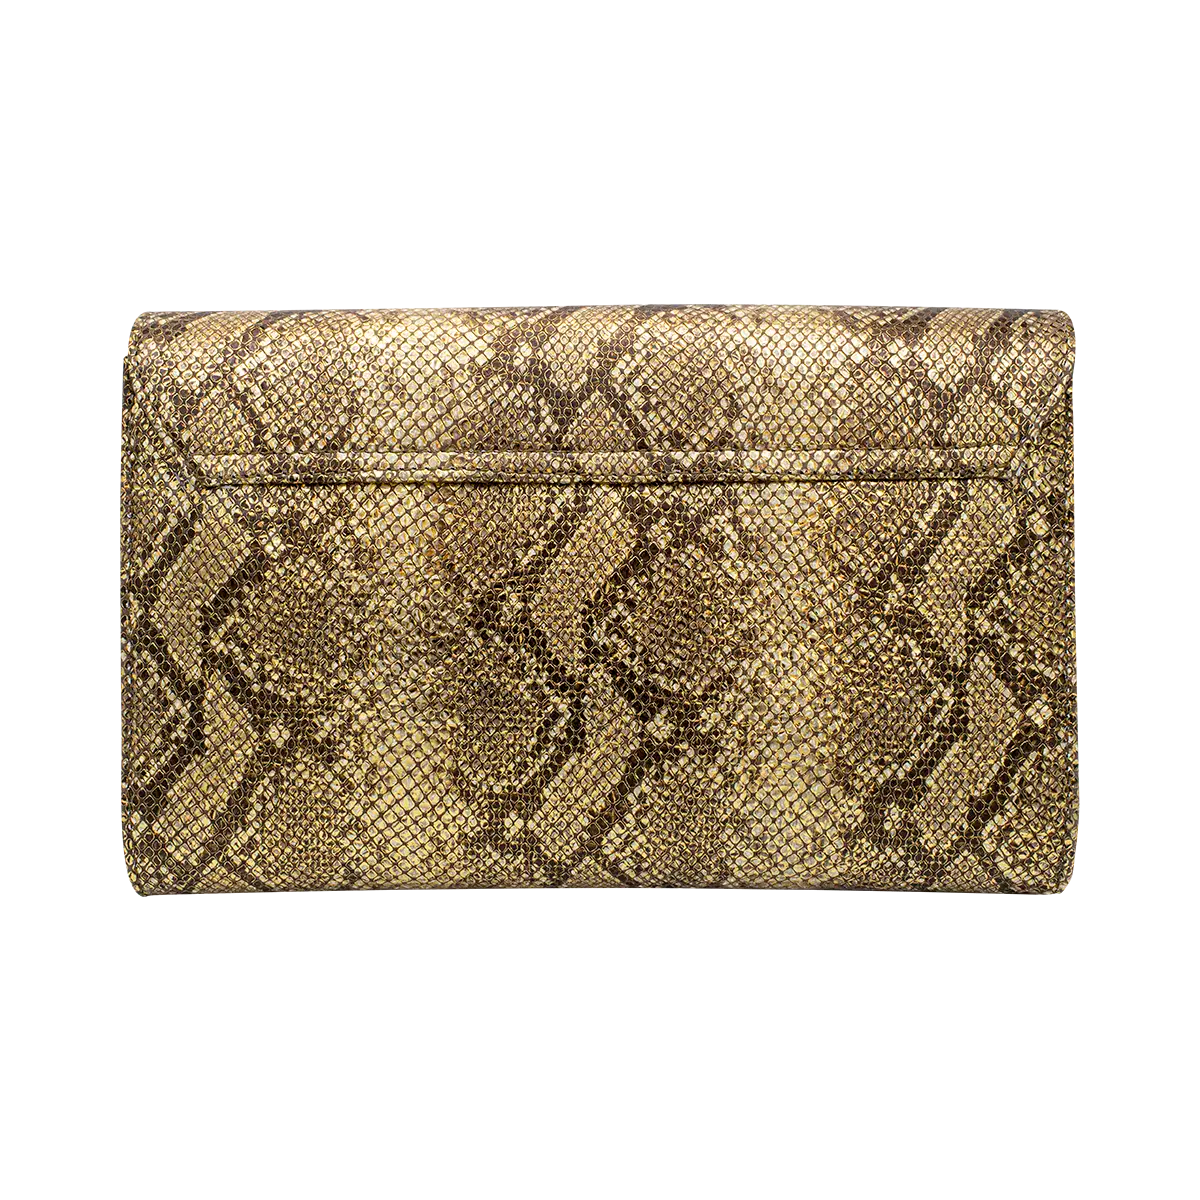 large bronze print print leather clutch with strap. Fashion accessory for women in San Diego, CA.